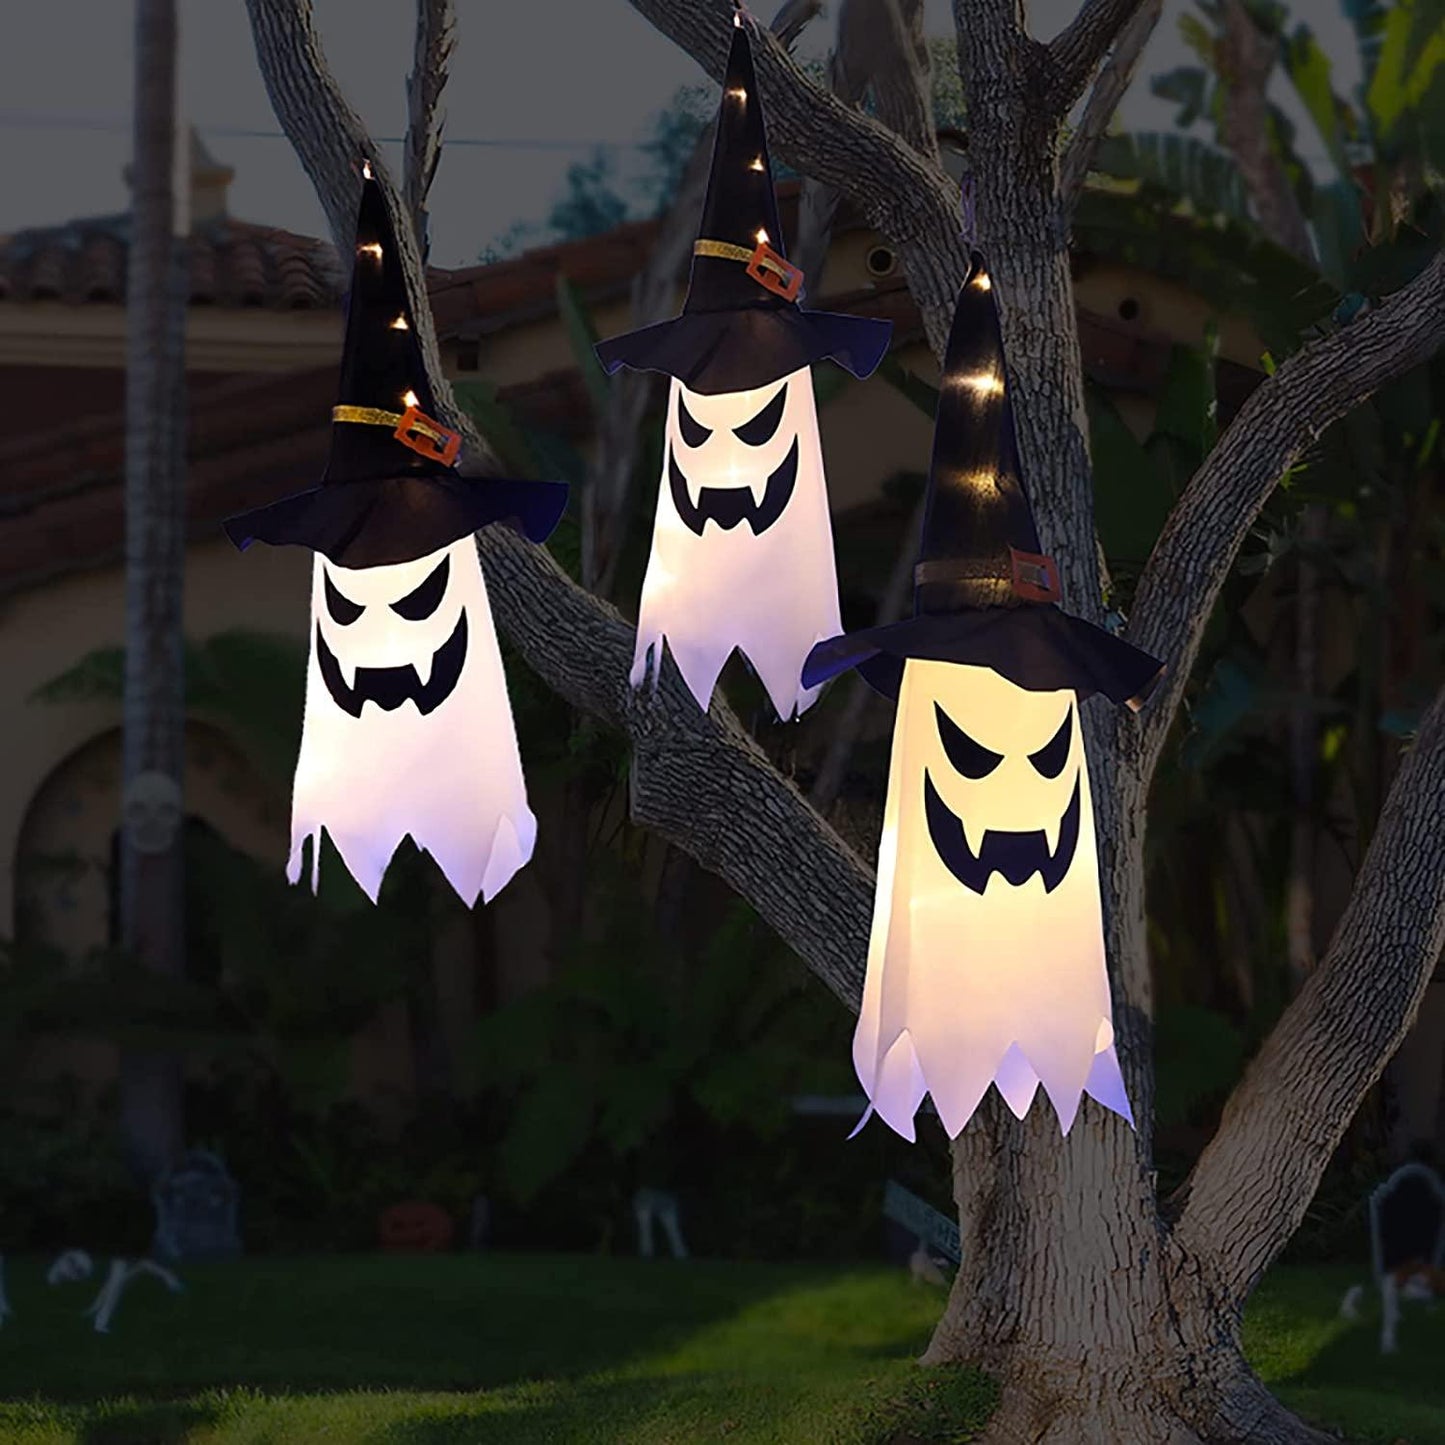 3pcs Halloween Decorations Outdoor Decor Hanging Lighted Glowing Ghost Witch Hats - If you say i do